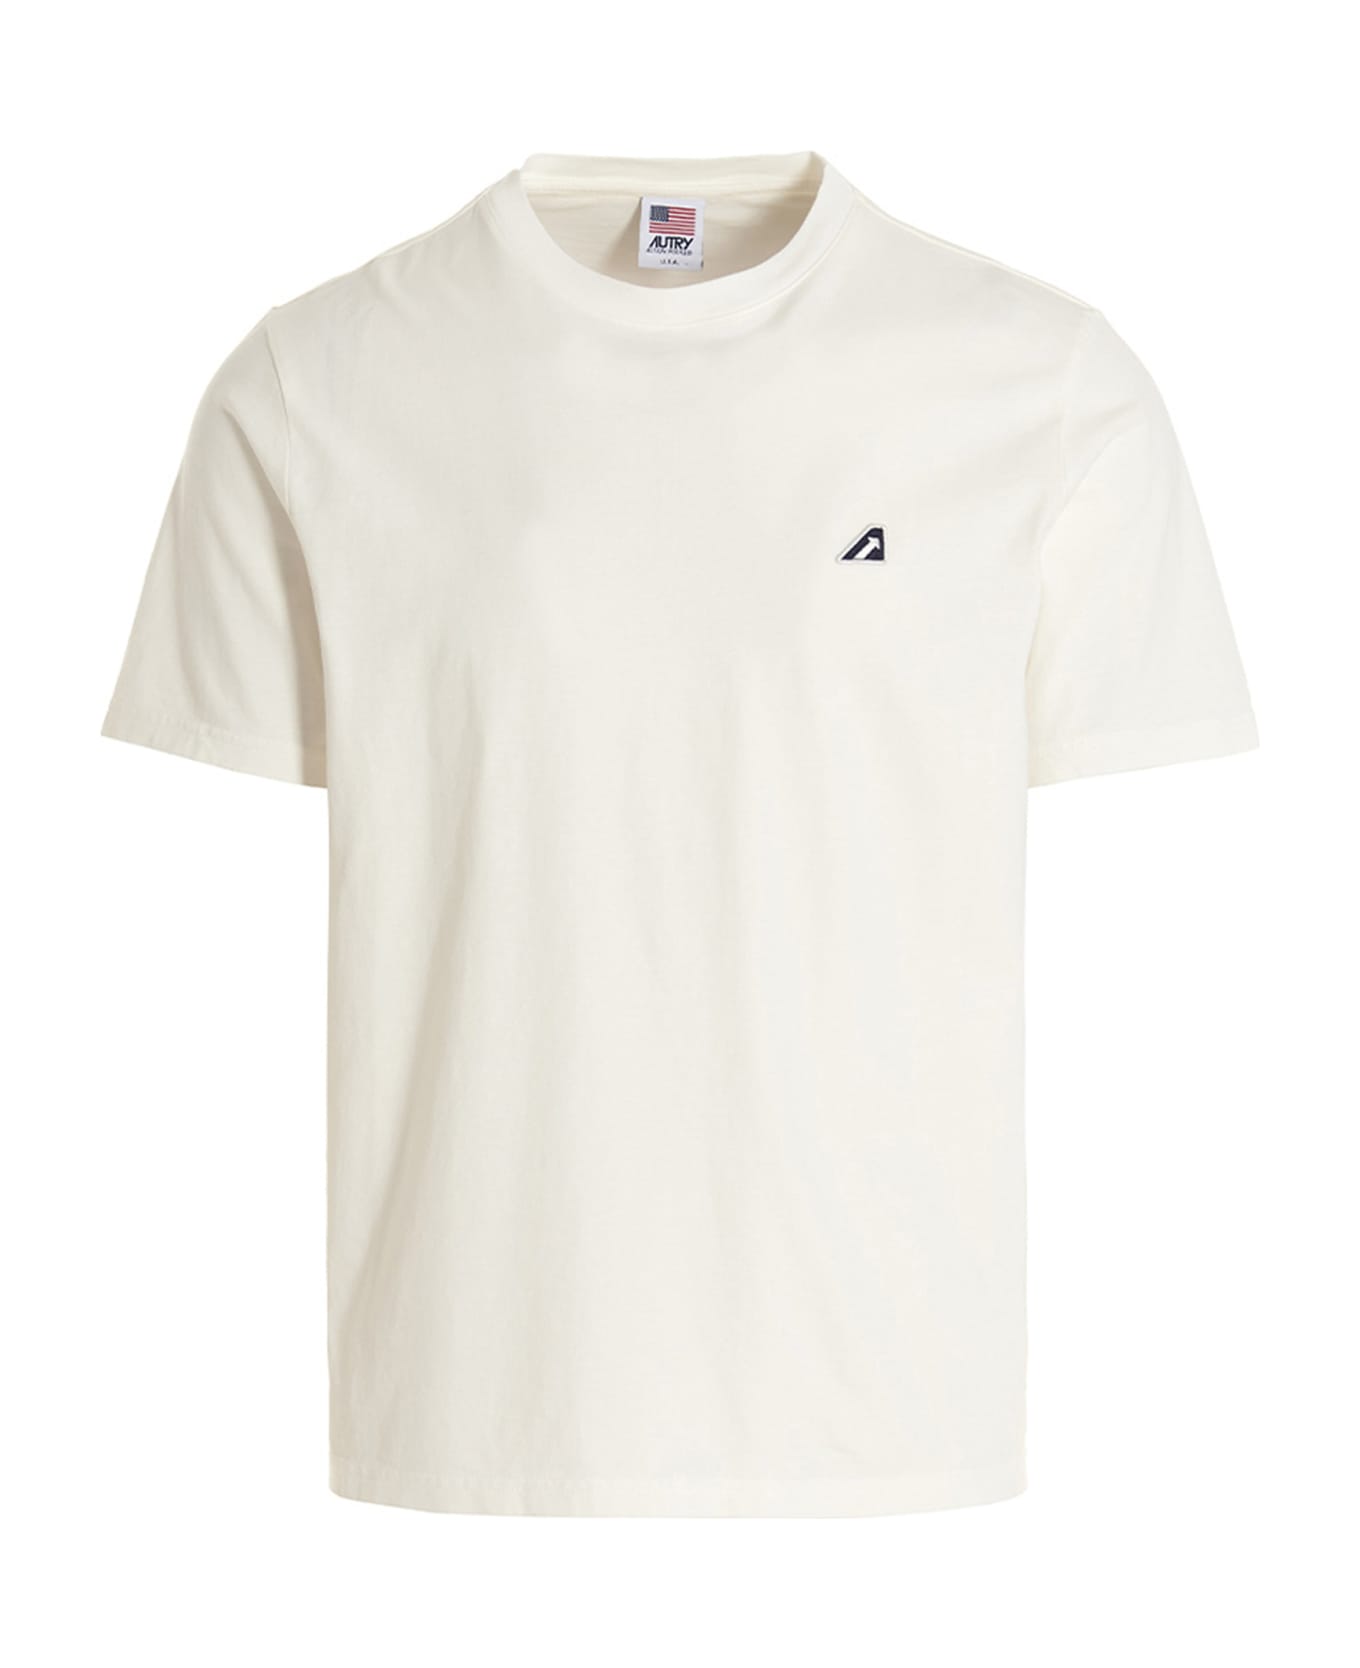 Autry 'iconic Tee  T-shirt - White